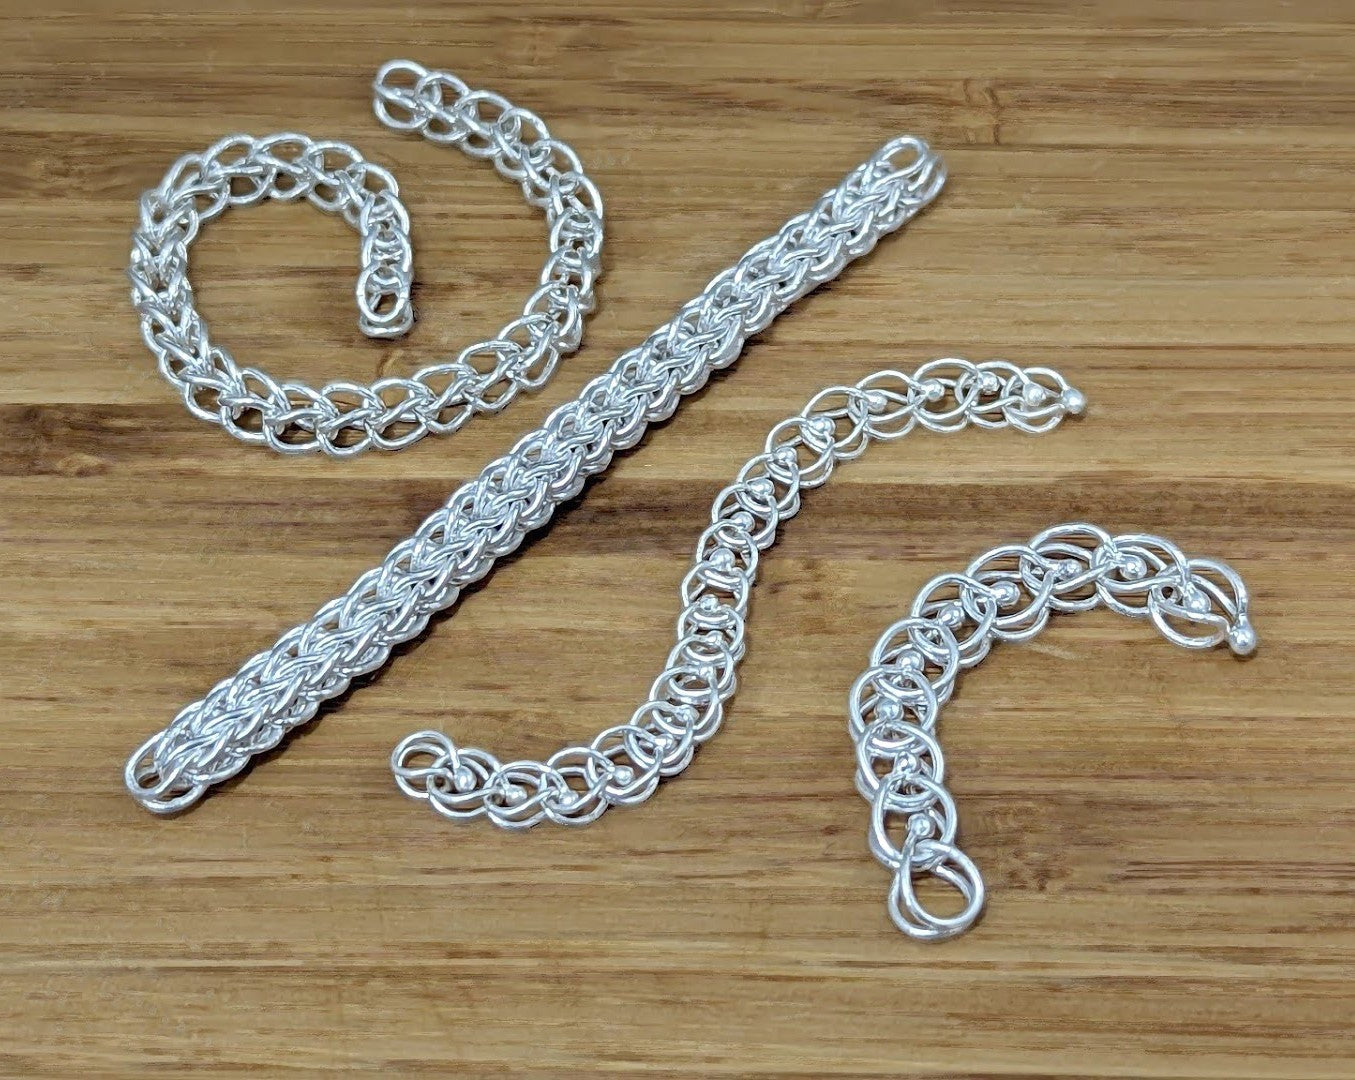 06/08 & 06/15 Fusing Fine Silver & Foxtail Chain (2 days)